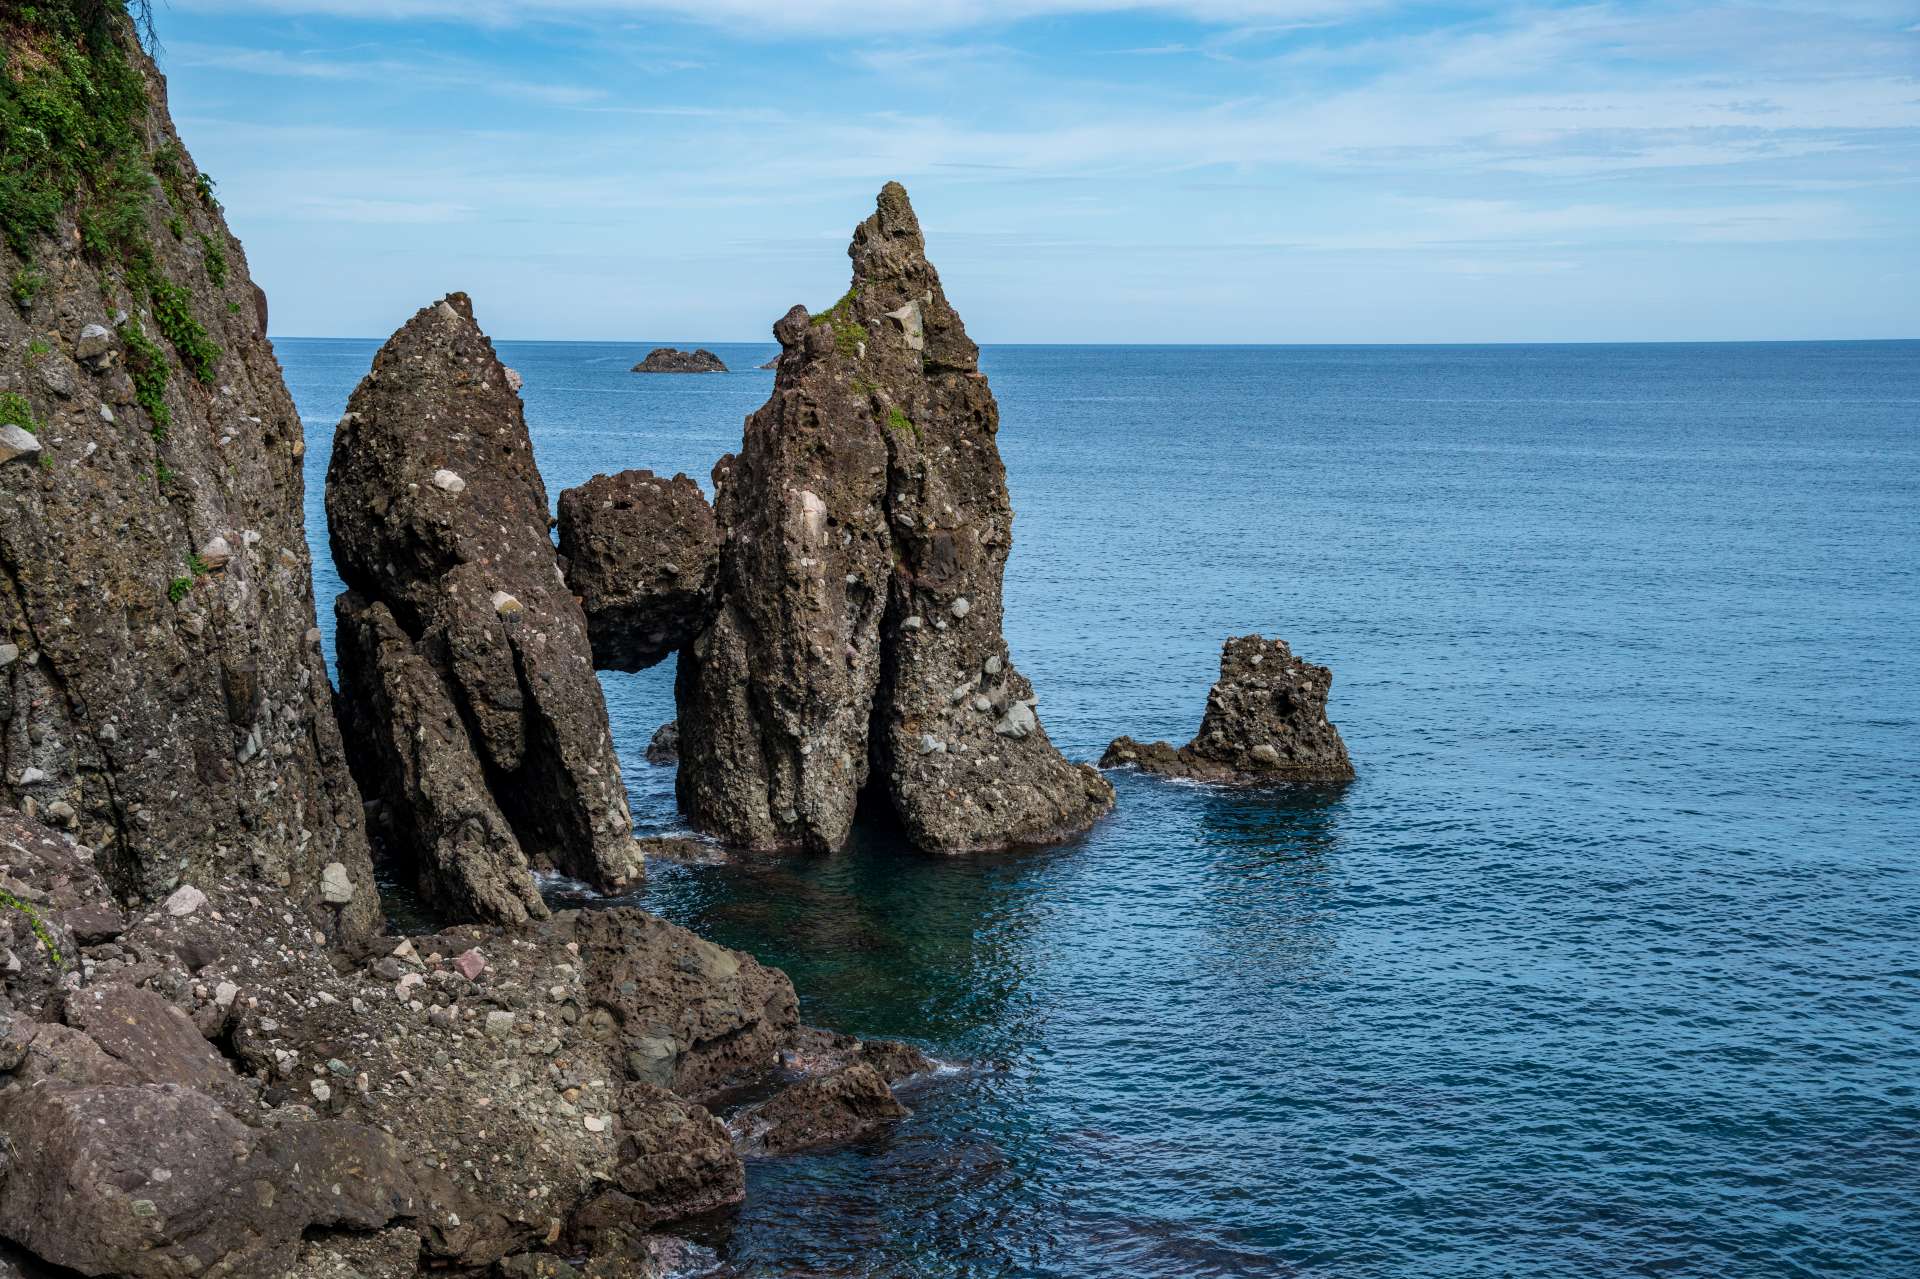 After driving along the San’in coast from Kasumi coast for about an hour, you will see the “Hasakari Rock” at Takeno beach. There are strangely structured rocks with a 3-4 m diameter rock sandwiched between two large pillar-shaped rocks. This peculiar balanced landscape made by nature will surely amuse you.